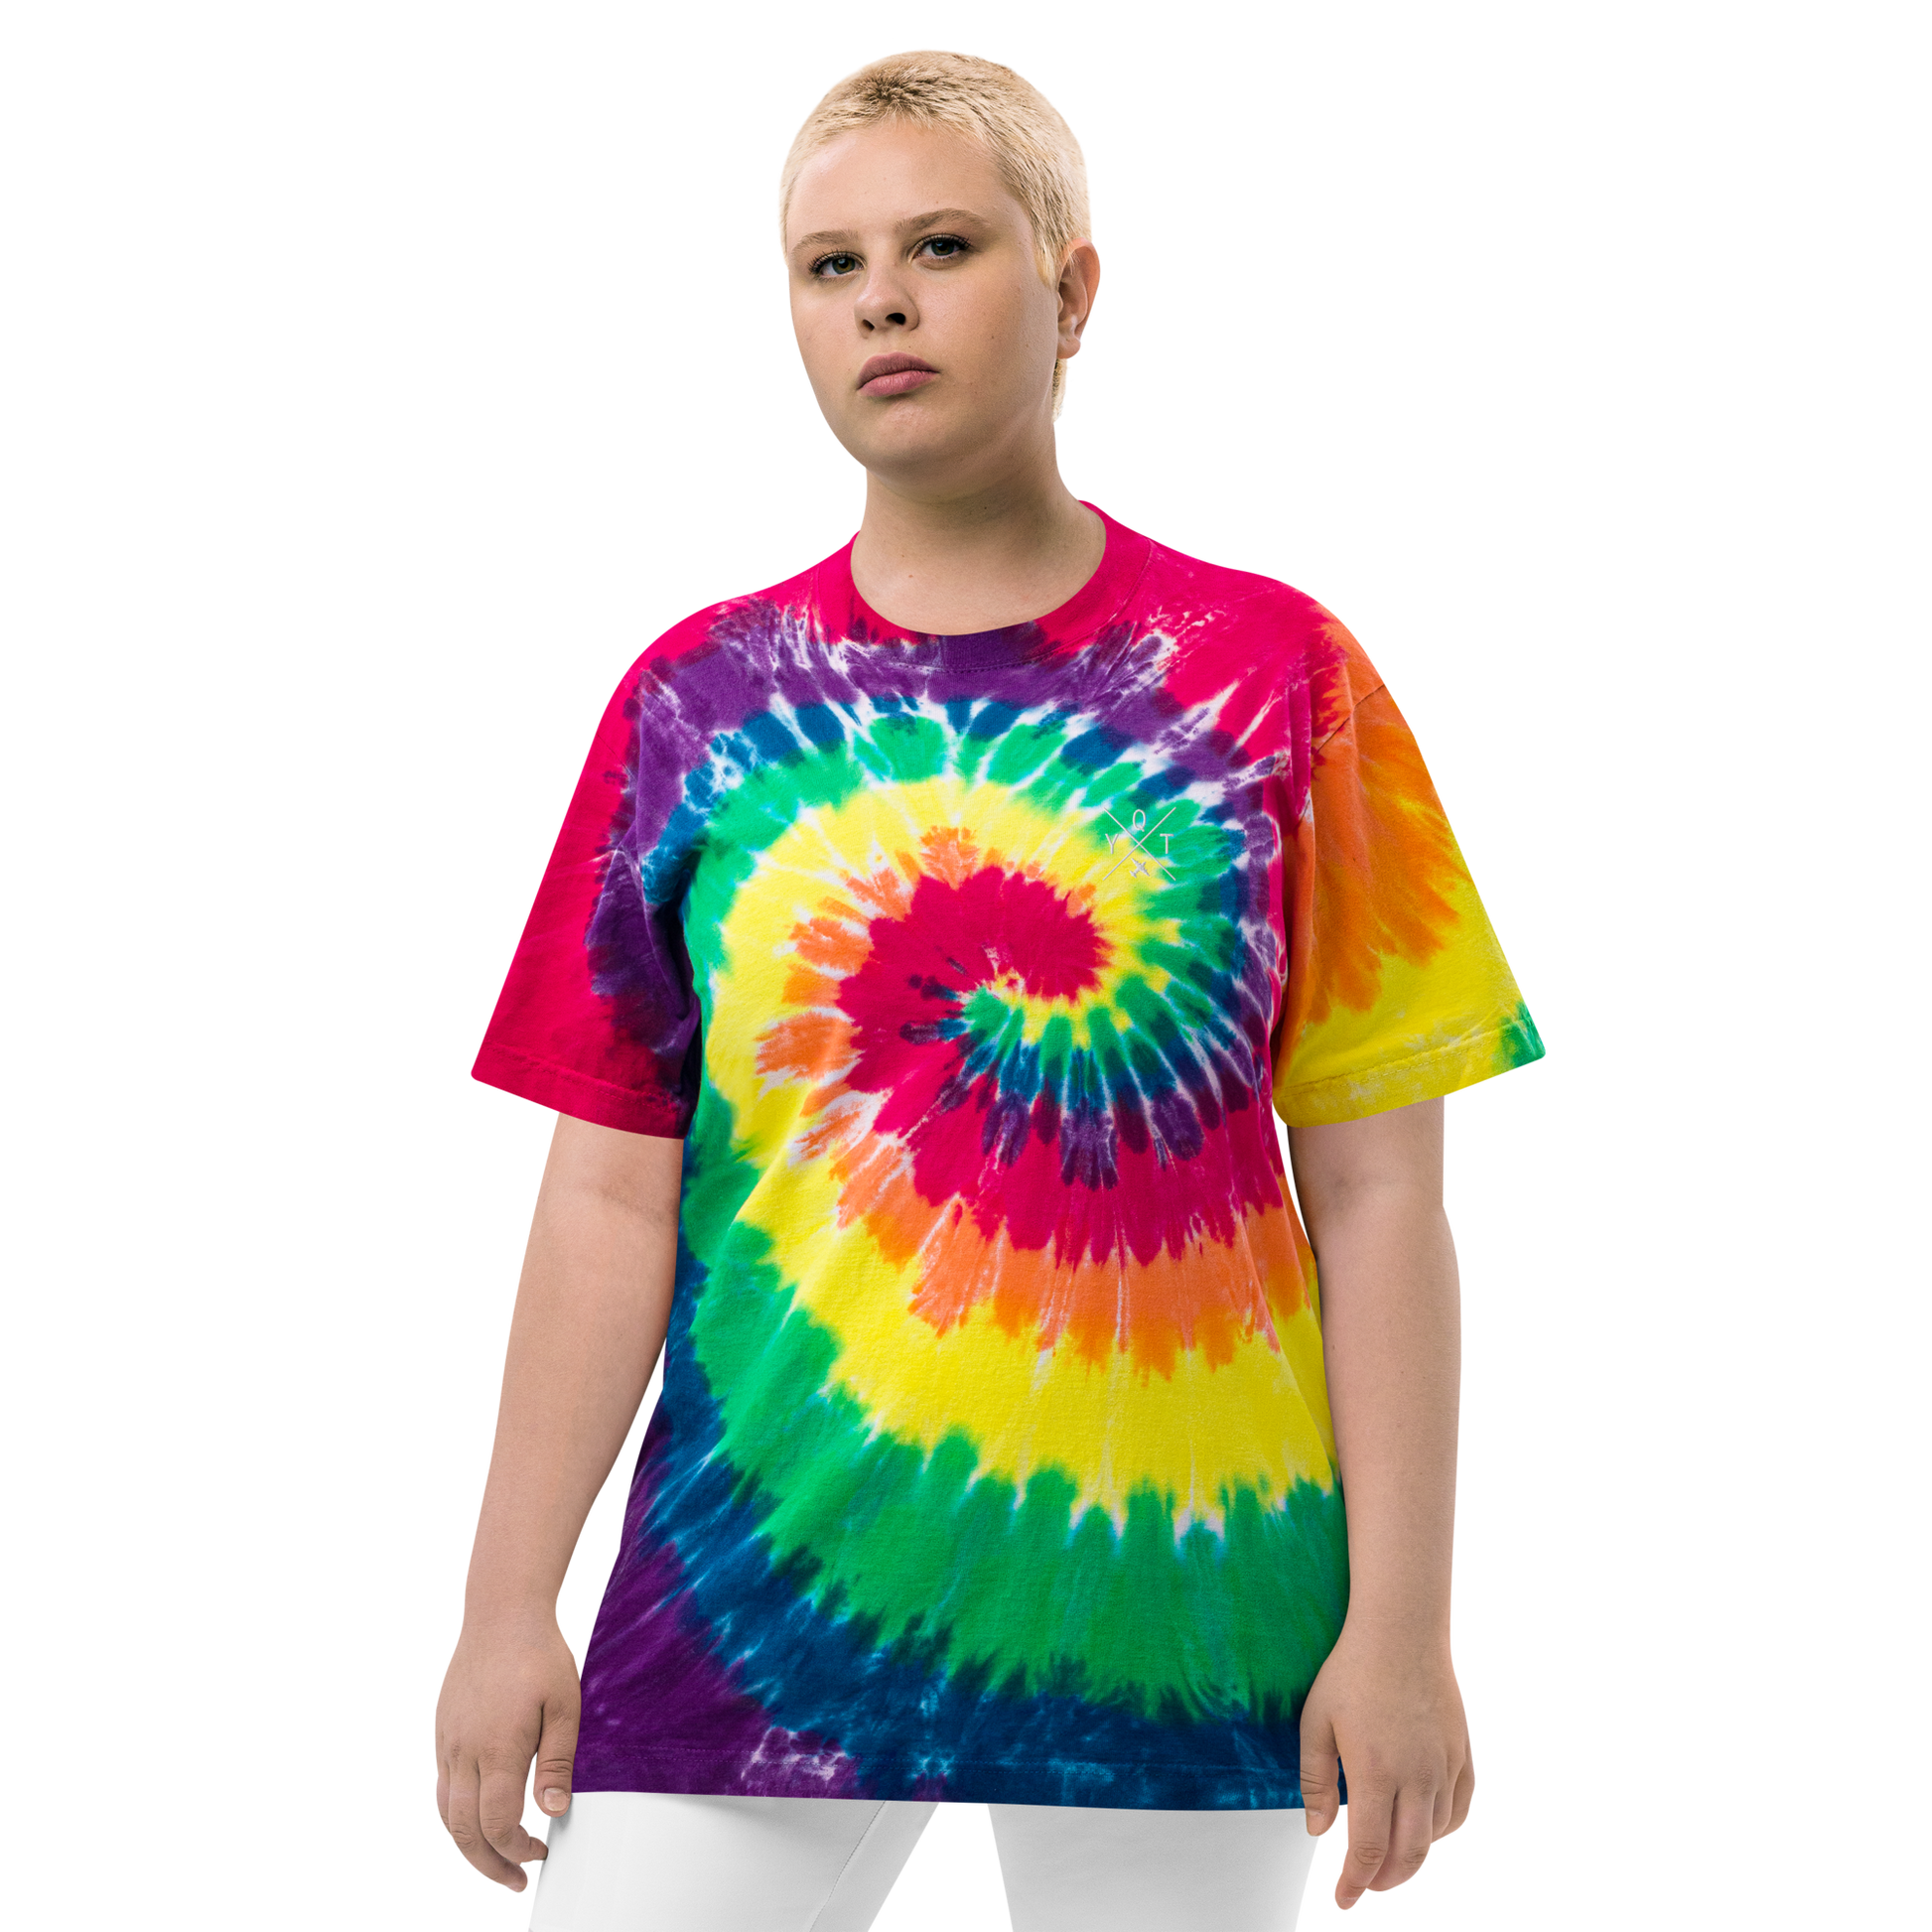 YHM Designs - YQT Thunder Bay Oversized Tie-Dye T-Shirt - Crossed-X Design with Airport Code and Vintage Propliner - White Embroidery - Image 01